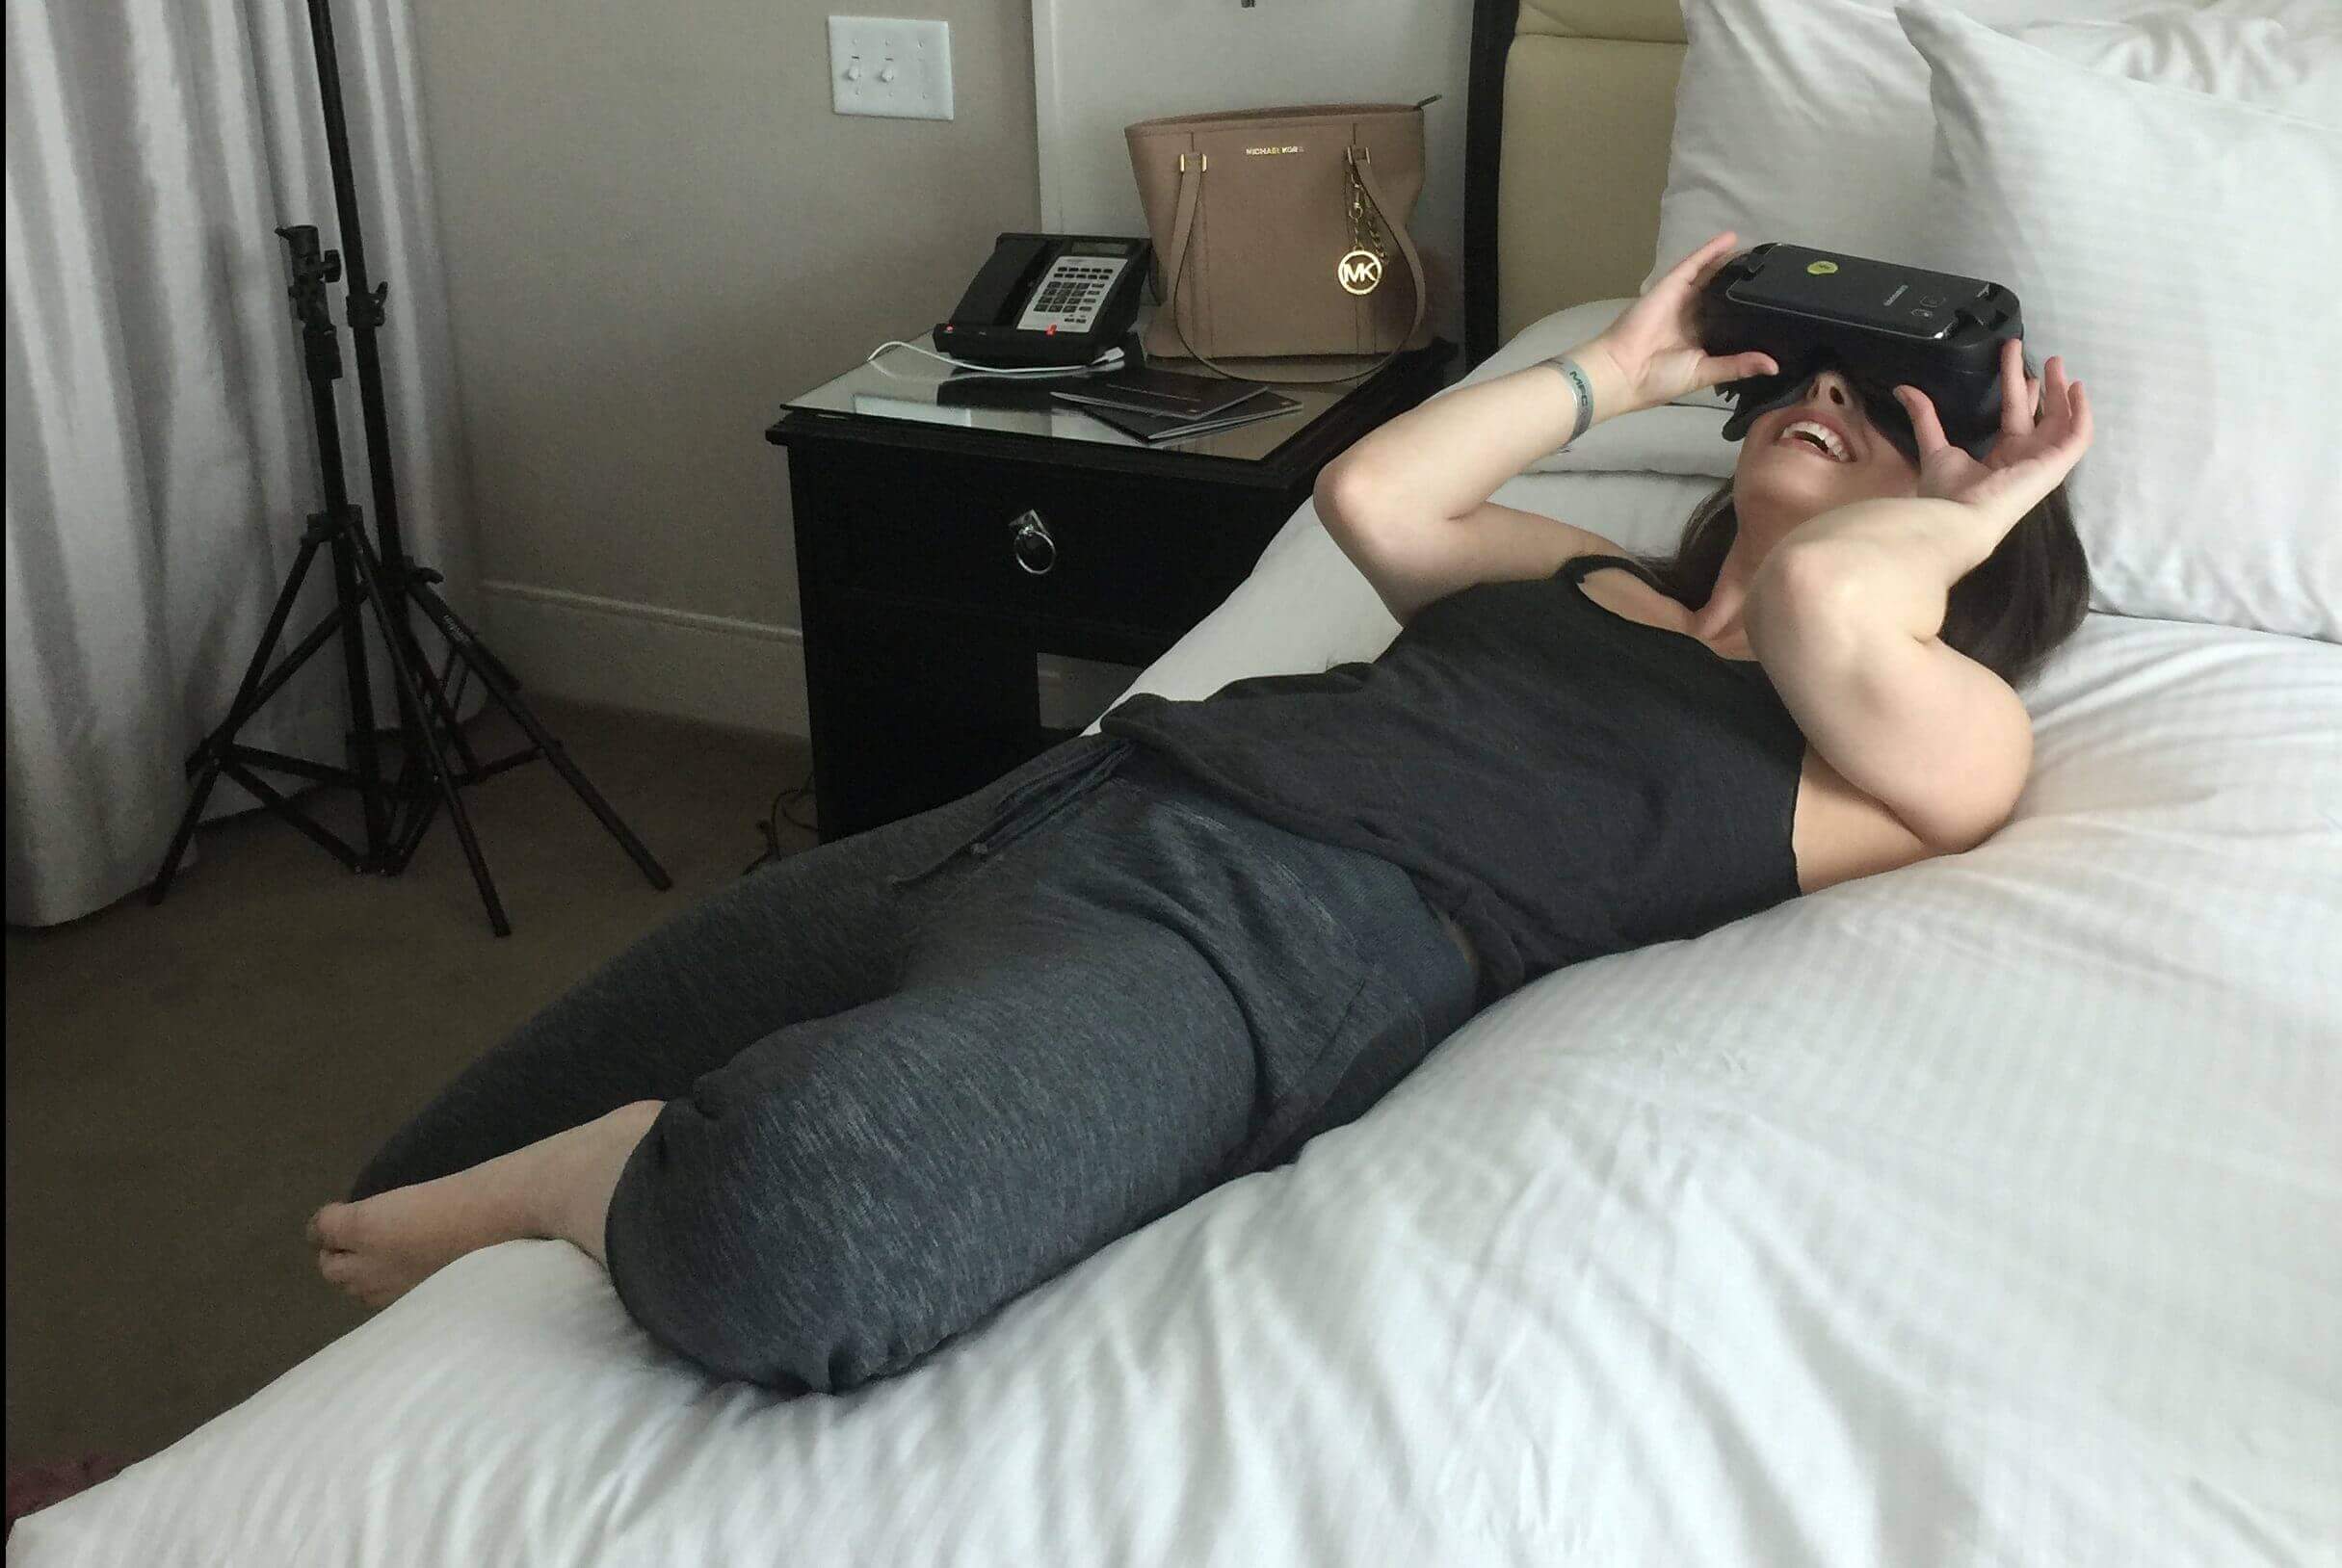 Casey Calvert video shoot is done and the actresses views her work on a Samsung Gear VR.